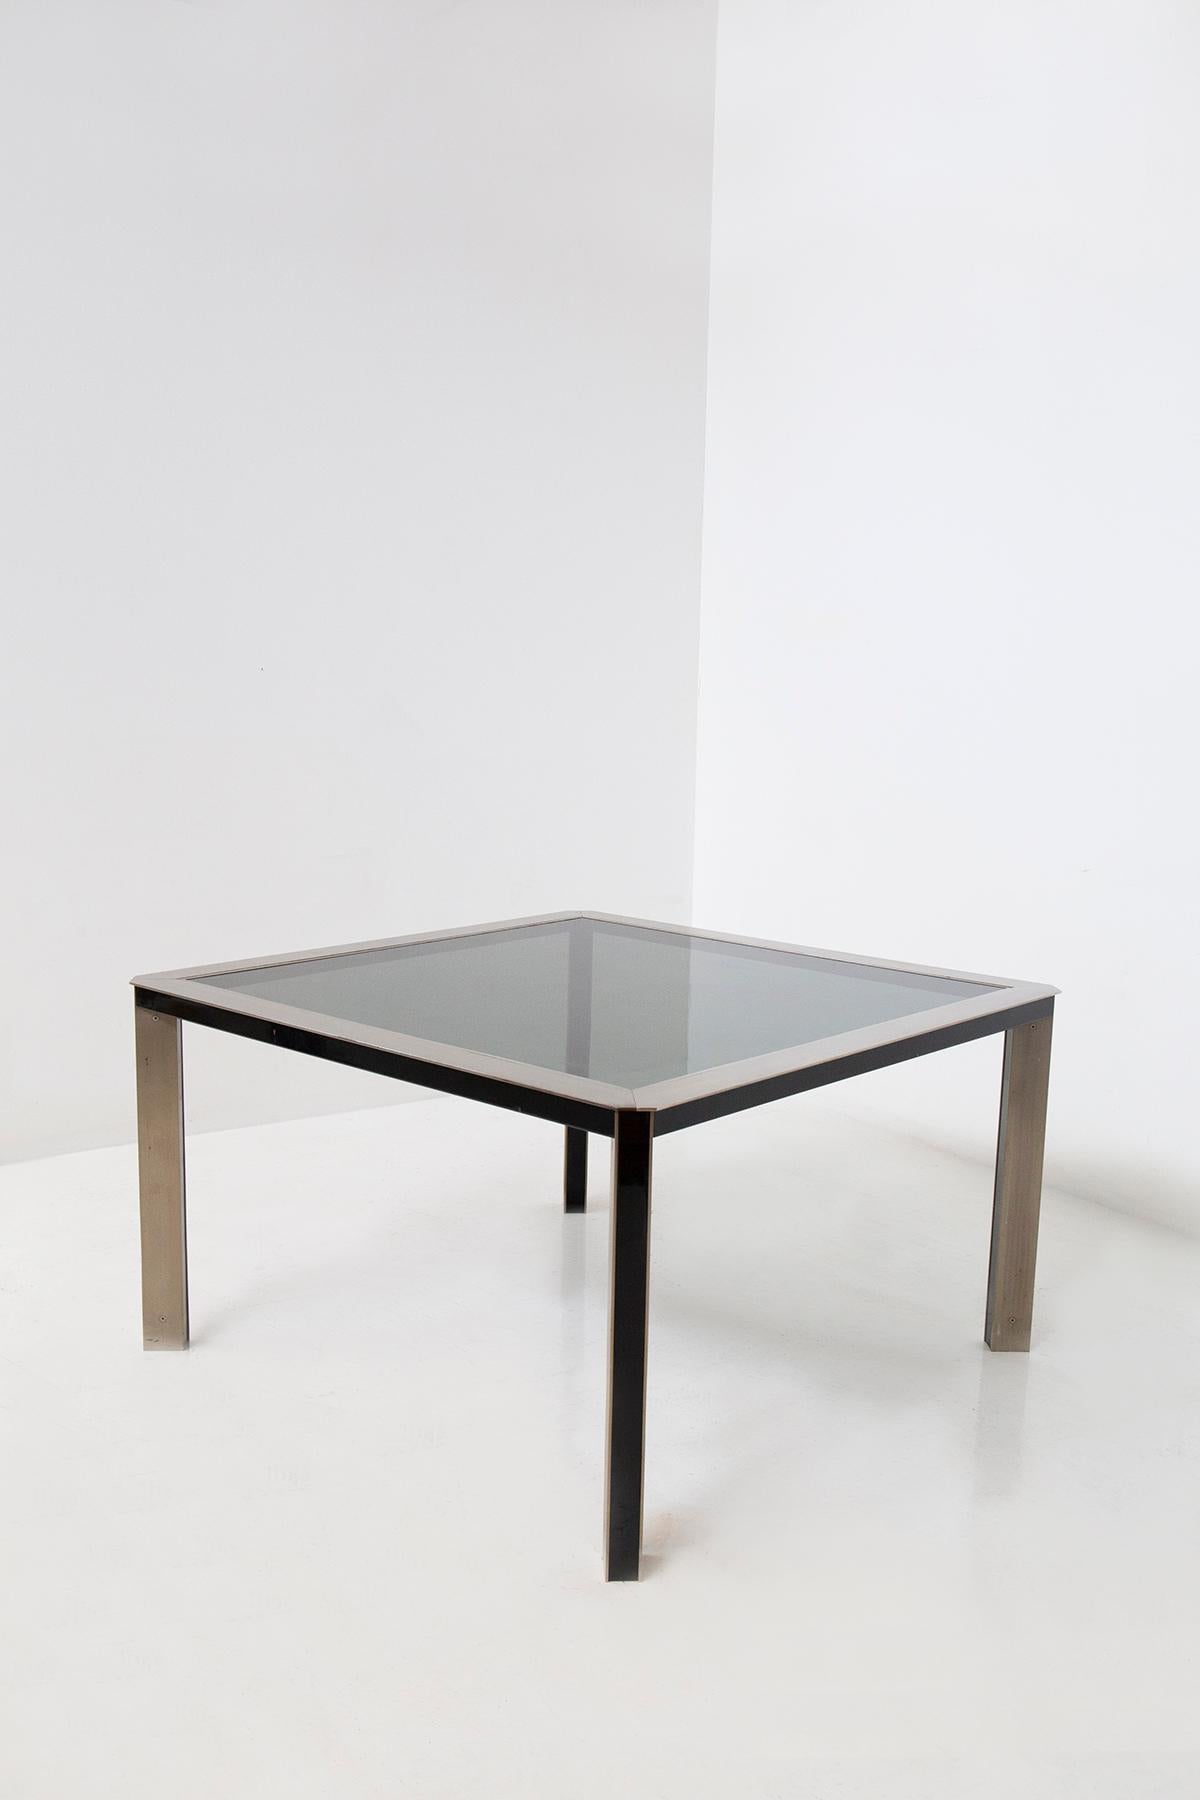 In the world of interior design, there are pieces that stand as timeless icons of a bygone era, and your vintage Italian steel and glass dining table from the 1970s is unquestionably one of them. This remarkable piece of furniture encapsulates the